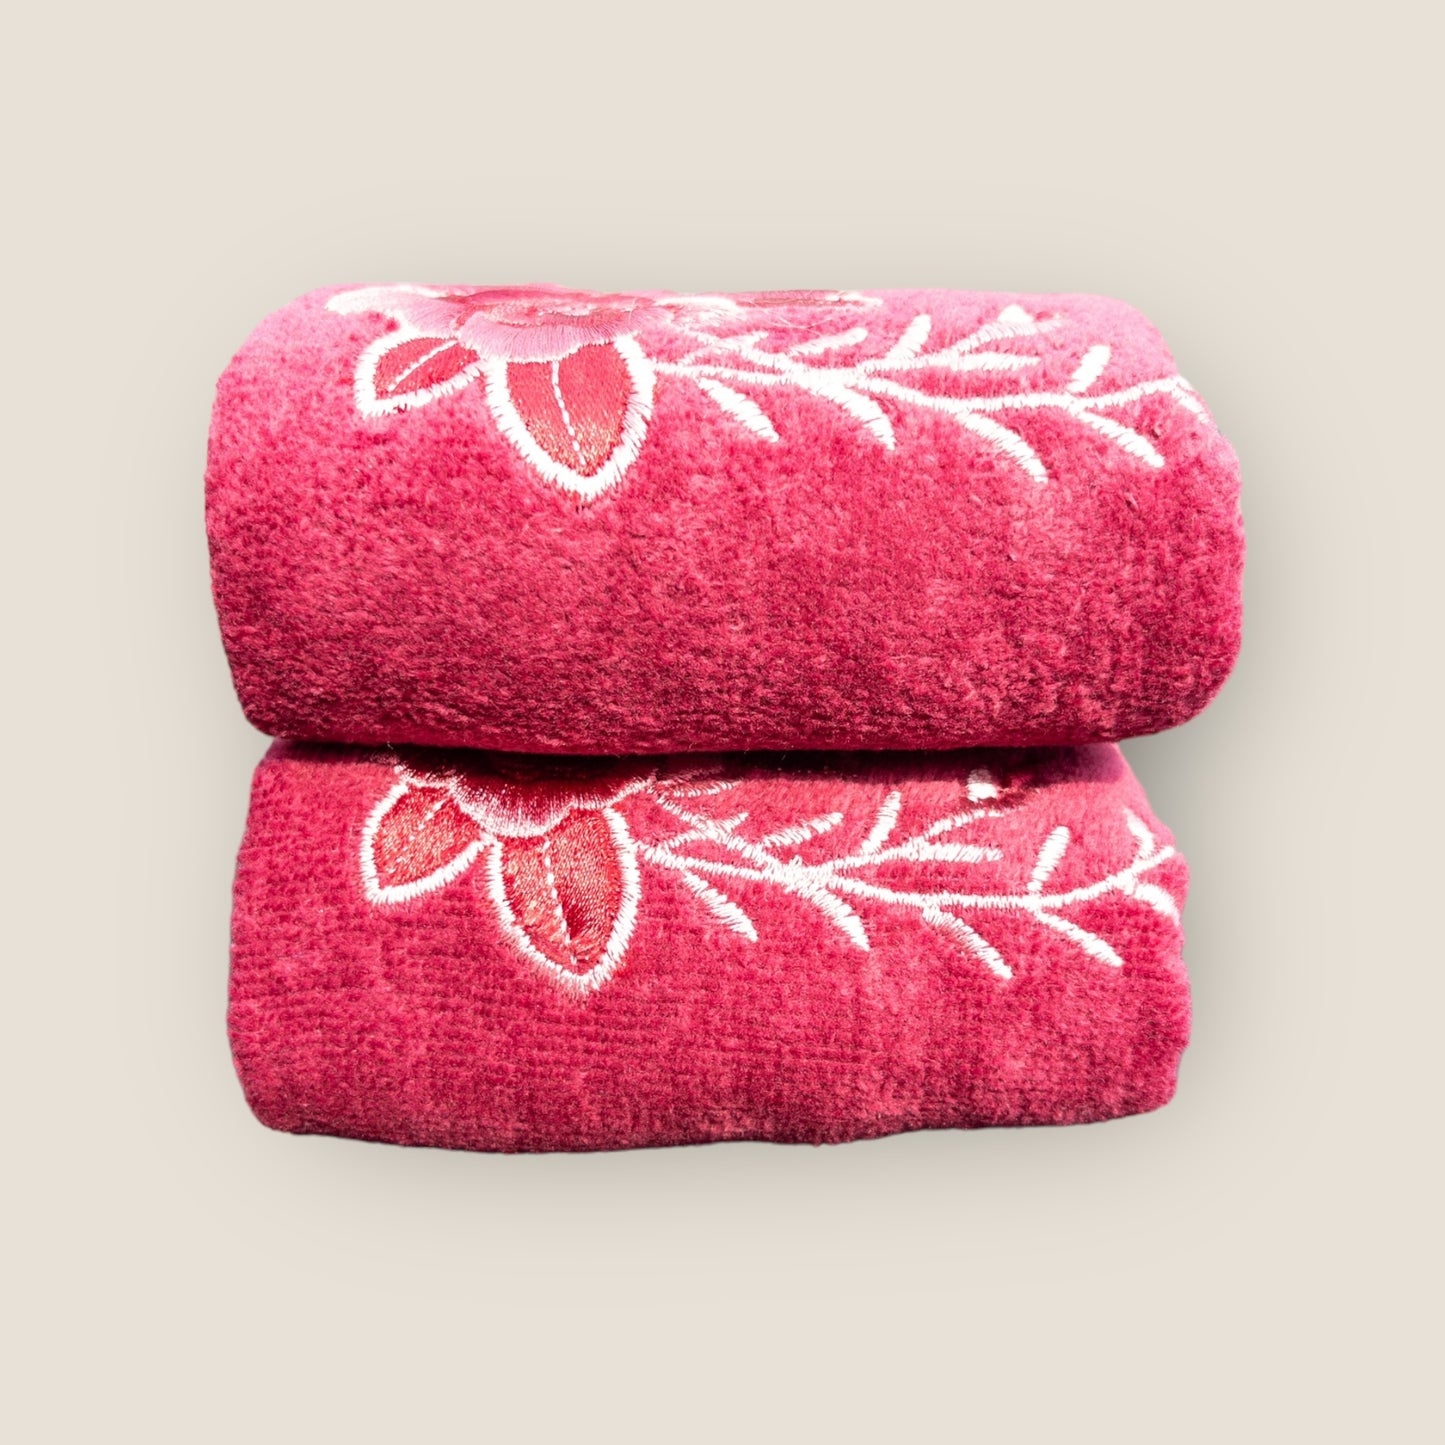 Two folded pink hand towels with big embroidered flowers made on it